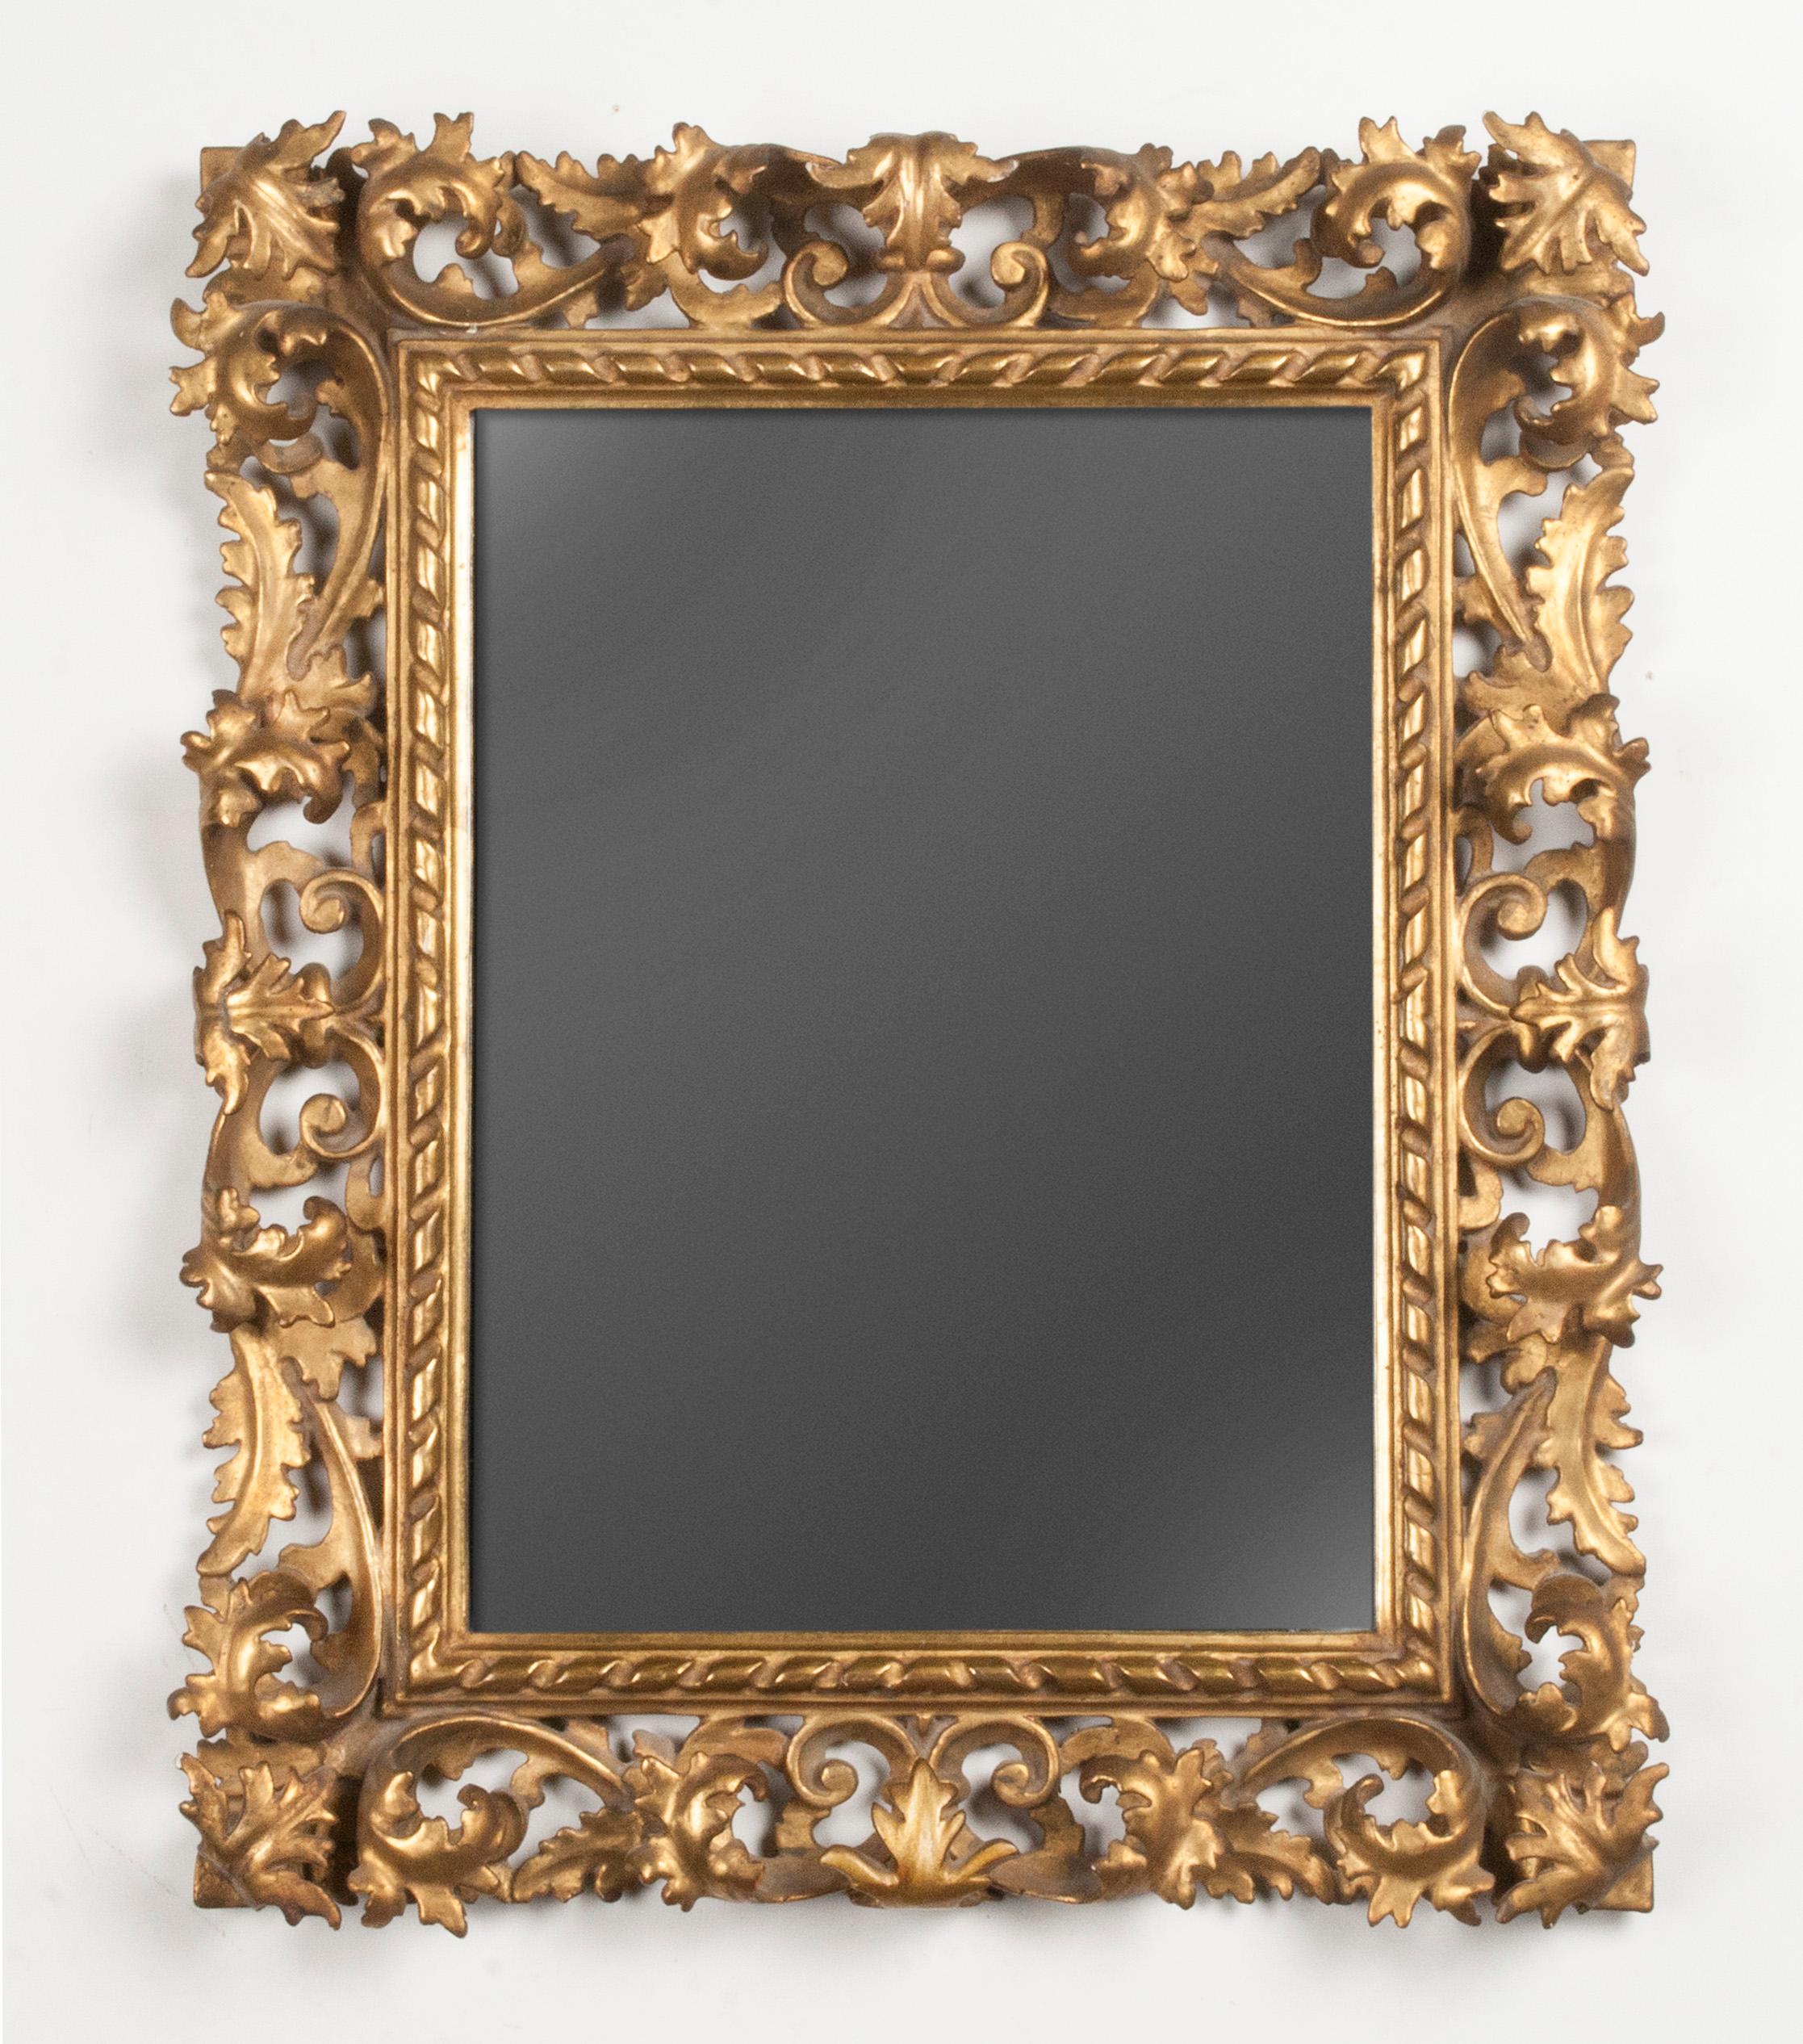 A late 19th century baroque revival wooden mirror from Italy. Refined hand carved from poplar wood. The frame is completely gold leaf gilt. The frame is deeply carved with scrolls and acanthus fronds. Mirror glass. For it's modest size, it is